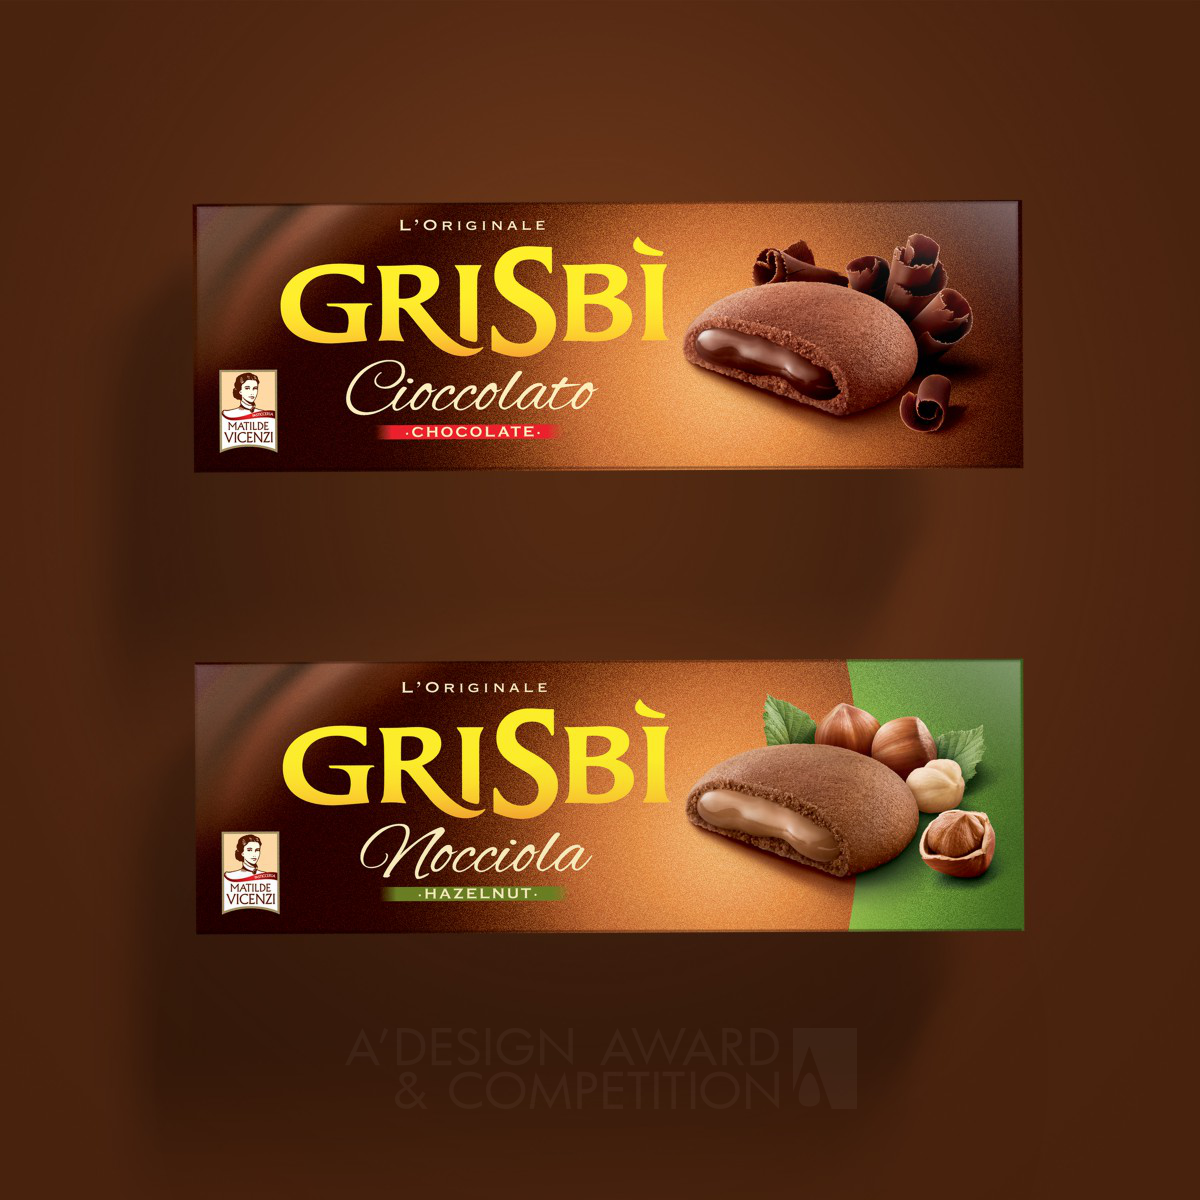 Grisbì biscuits Brand & Packaging Identity by Neom